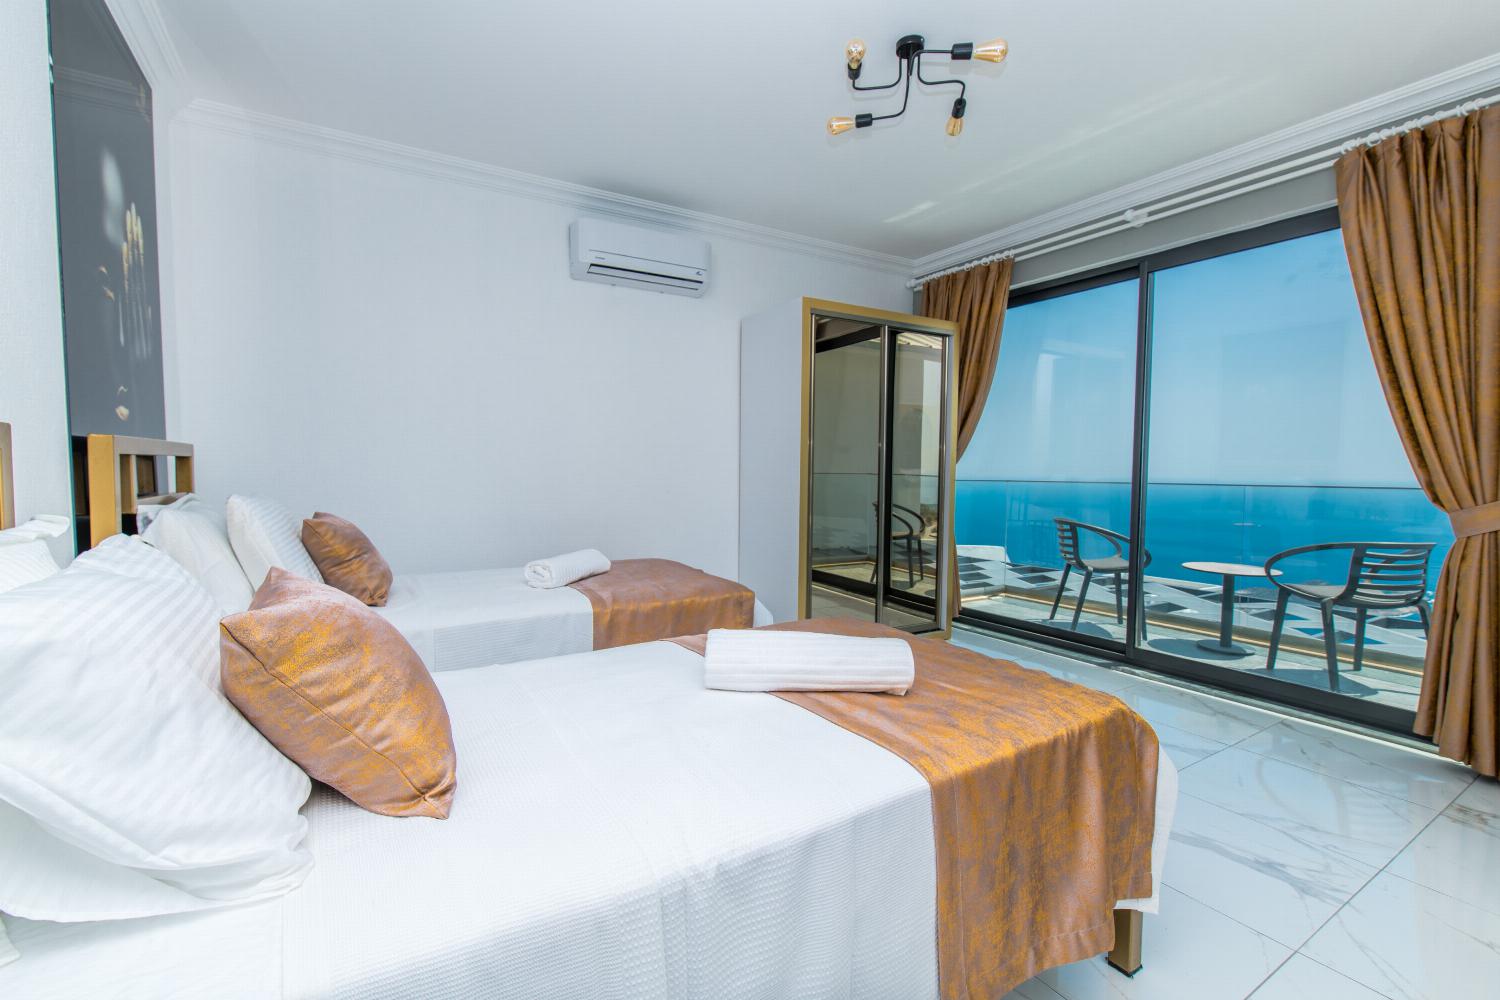 Twinbedroom with A/C, and upper terrace access with panoramic sea views